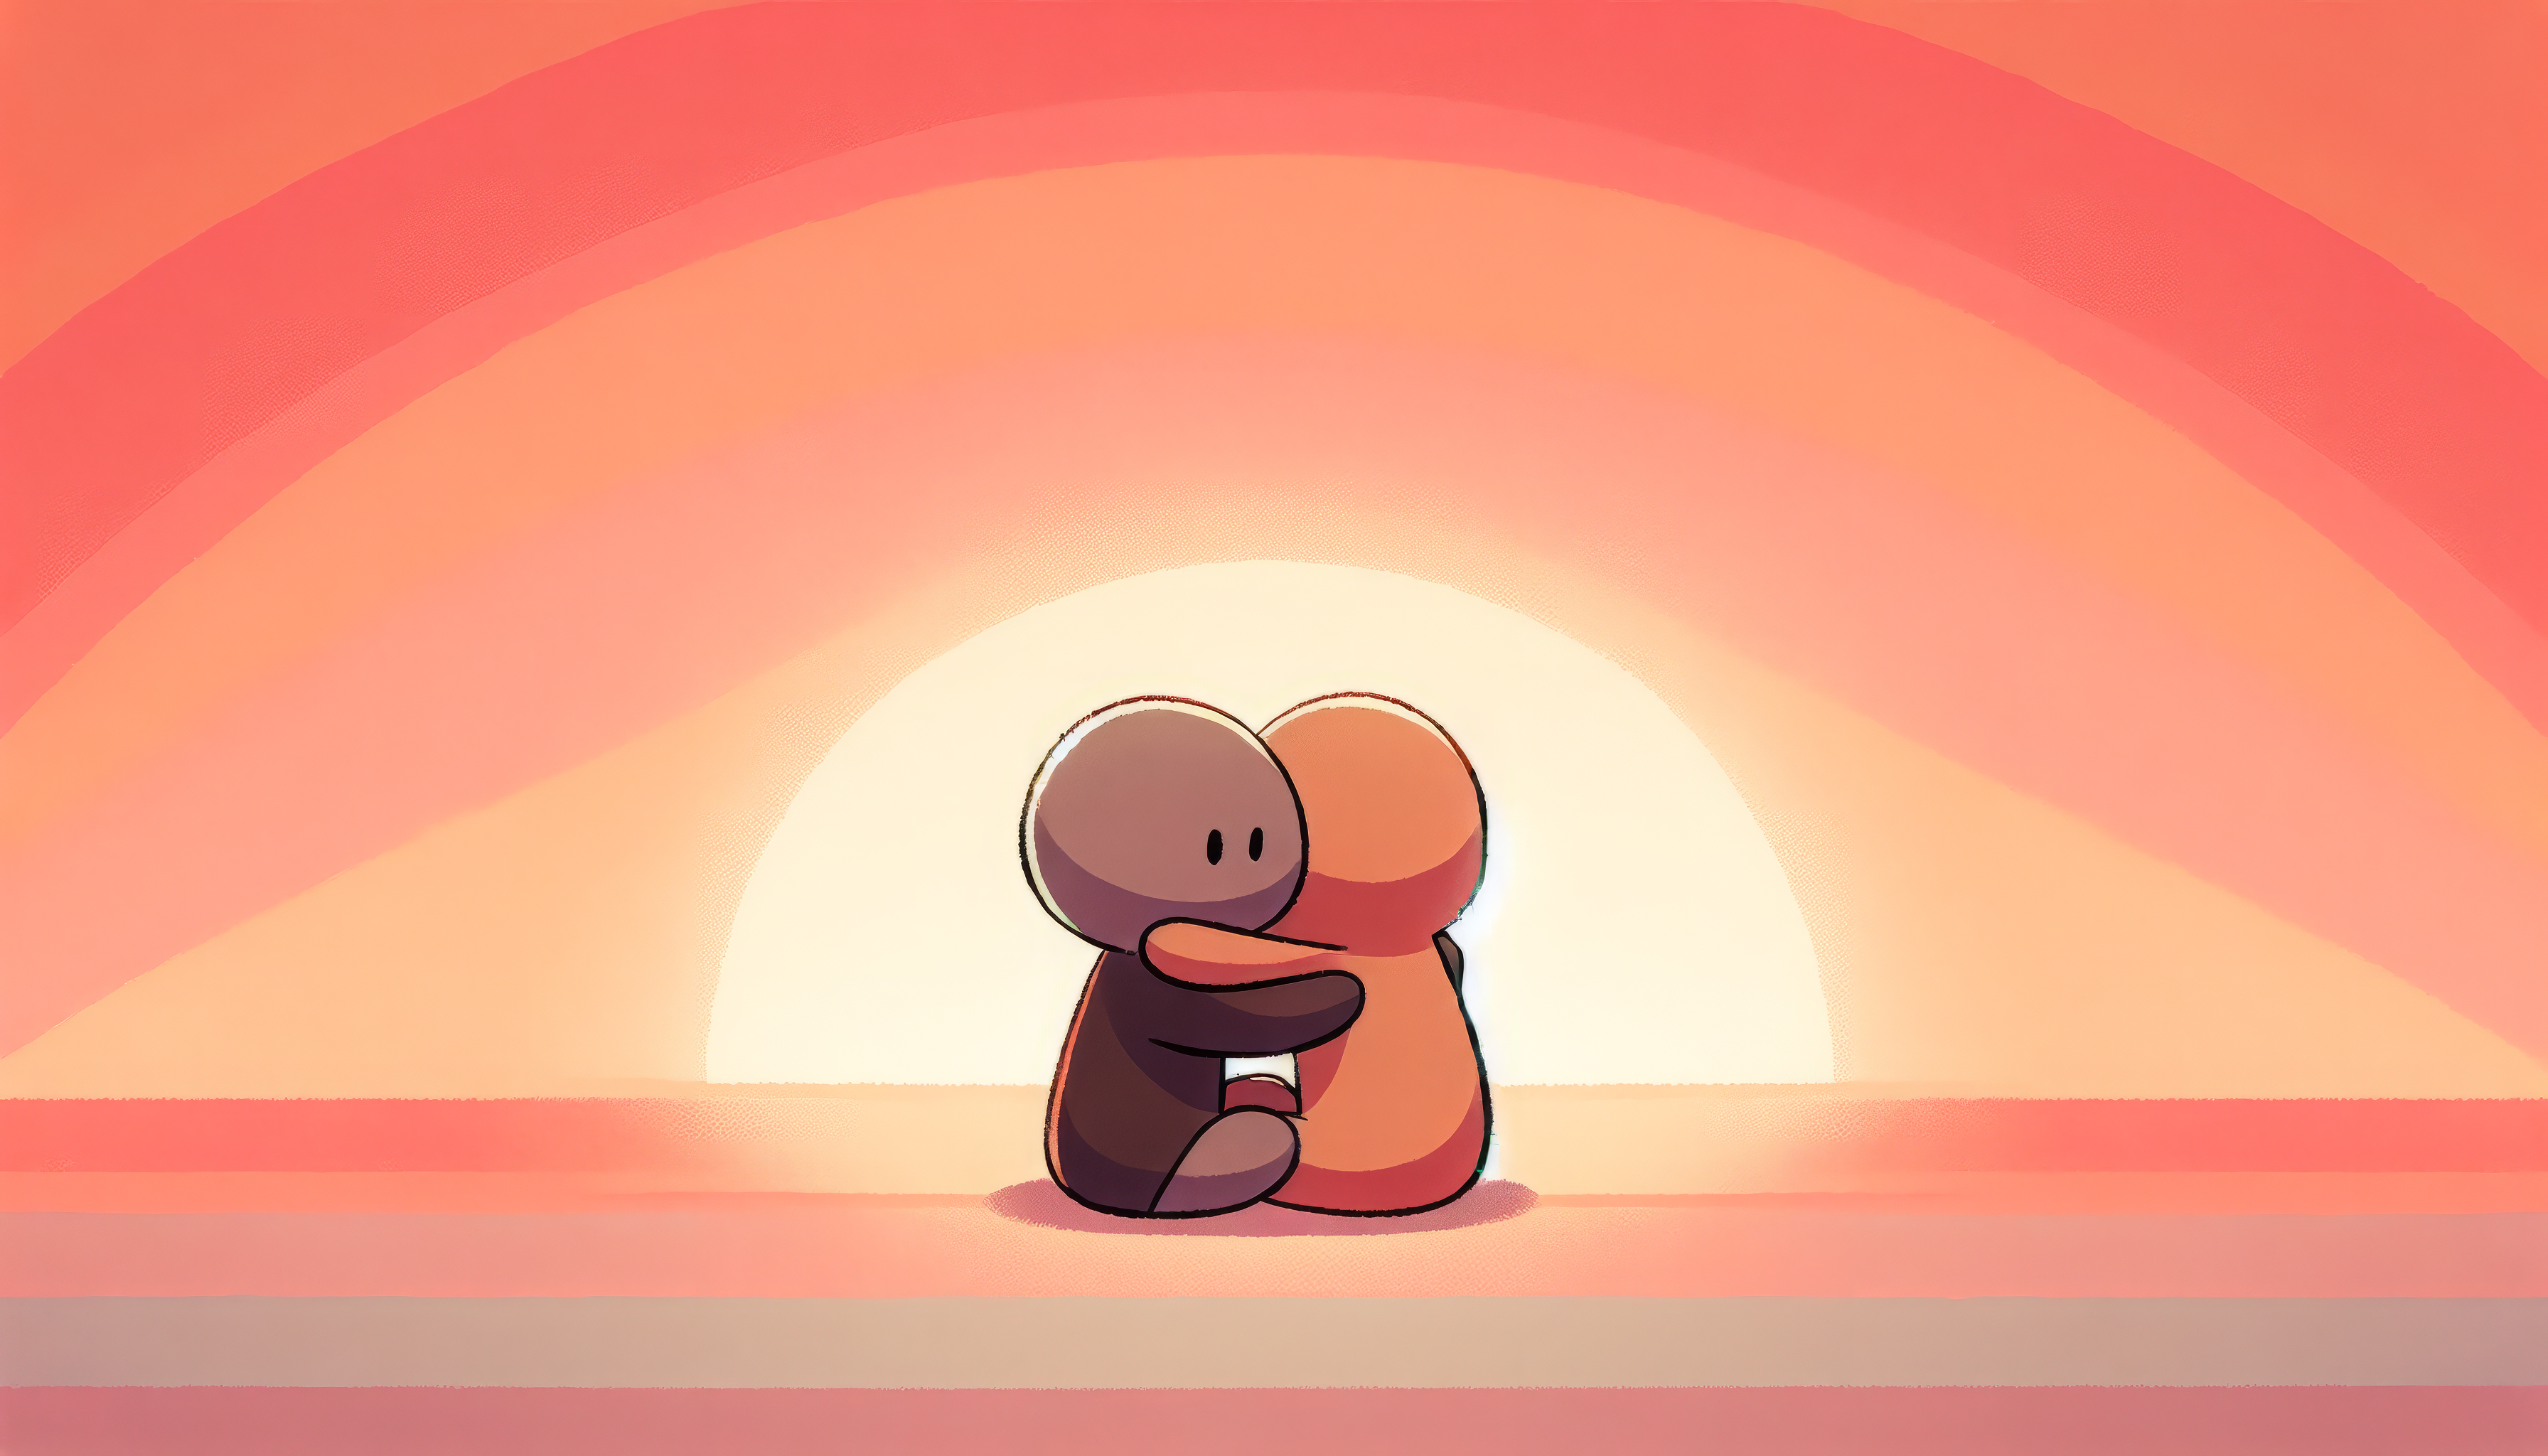 Alt Text: Warm embrace illustration with two cute characters hugging each other, set against a soft pink sunset background, perfect for HD desktop wallpaper and background with a hug theme.